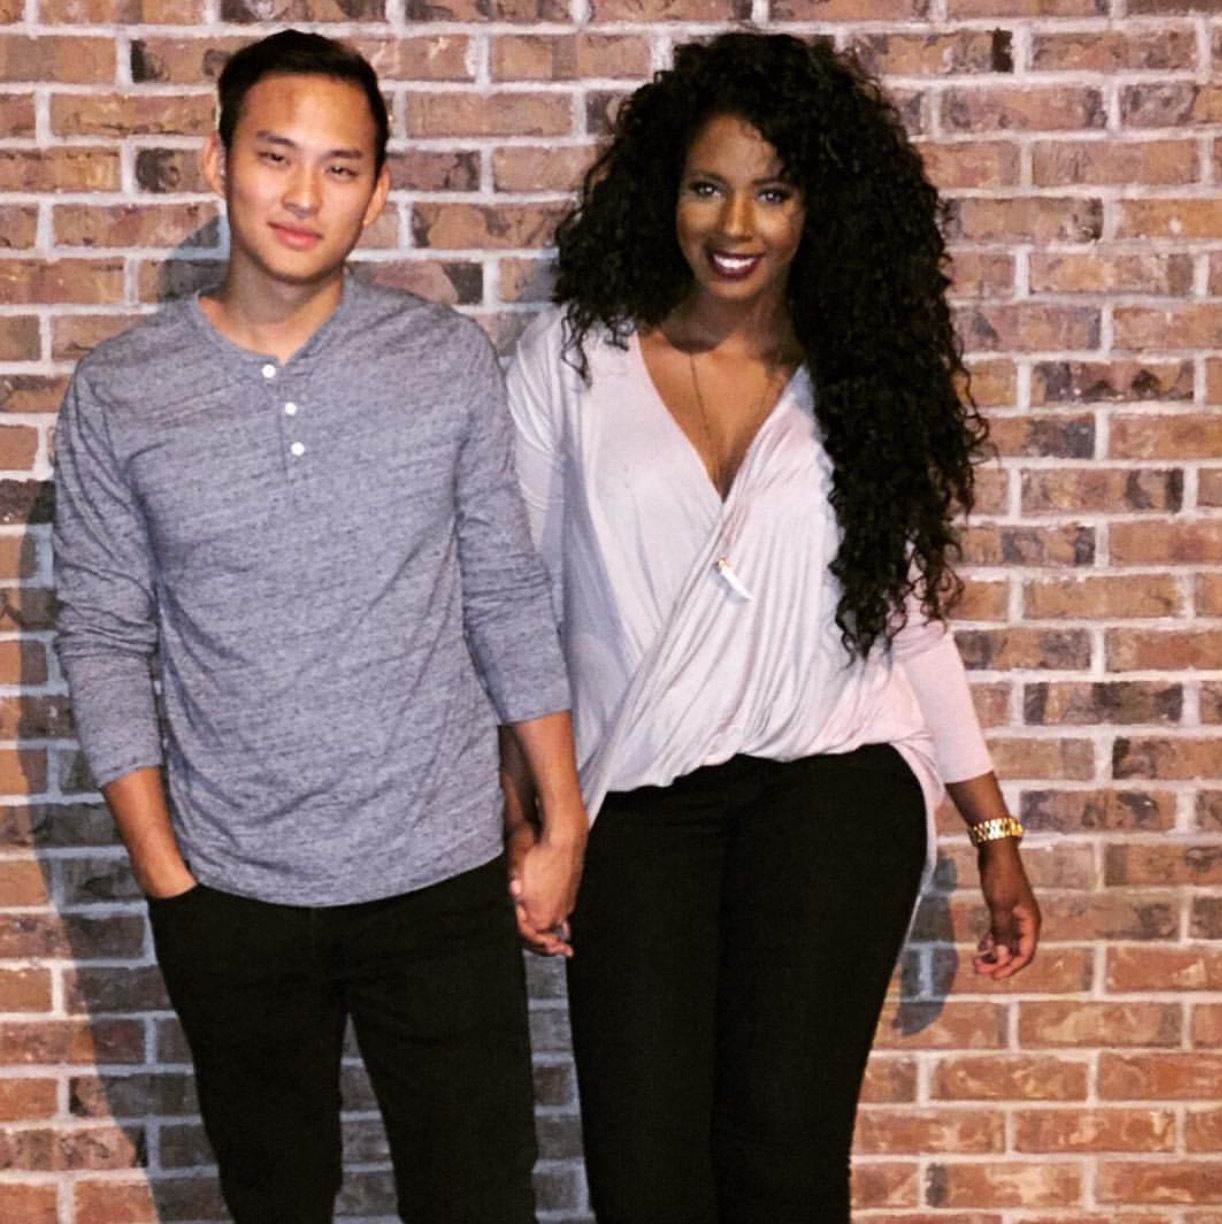 Red H. reccomend Asian men and date black women